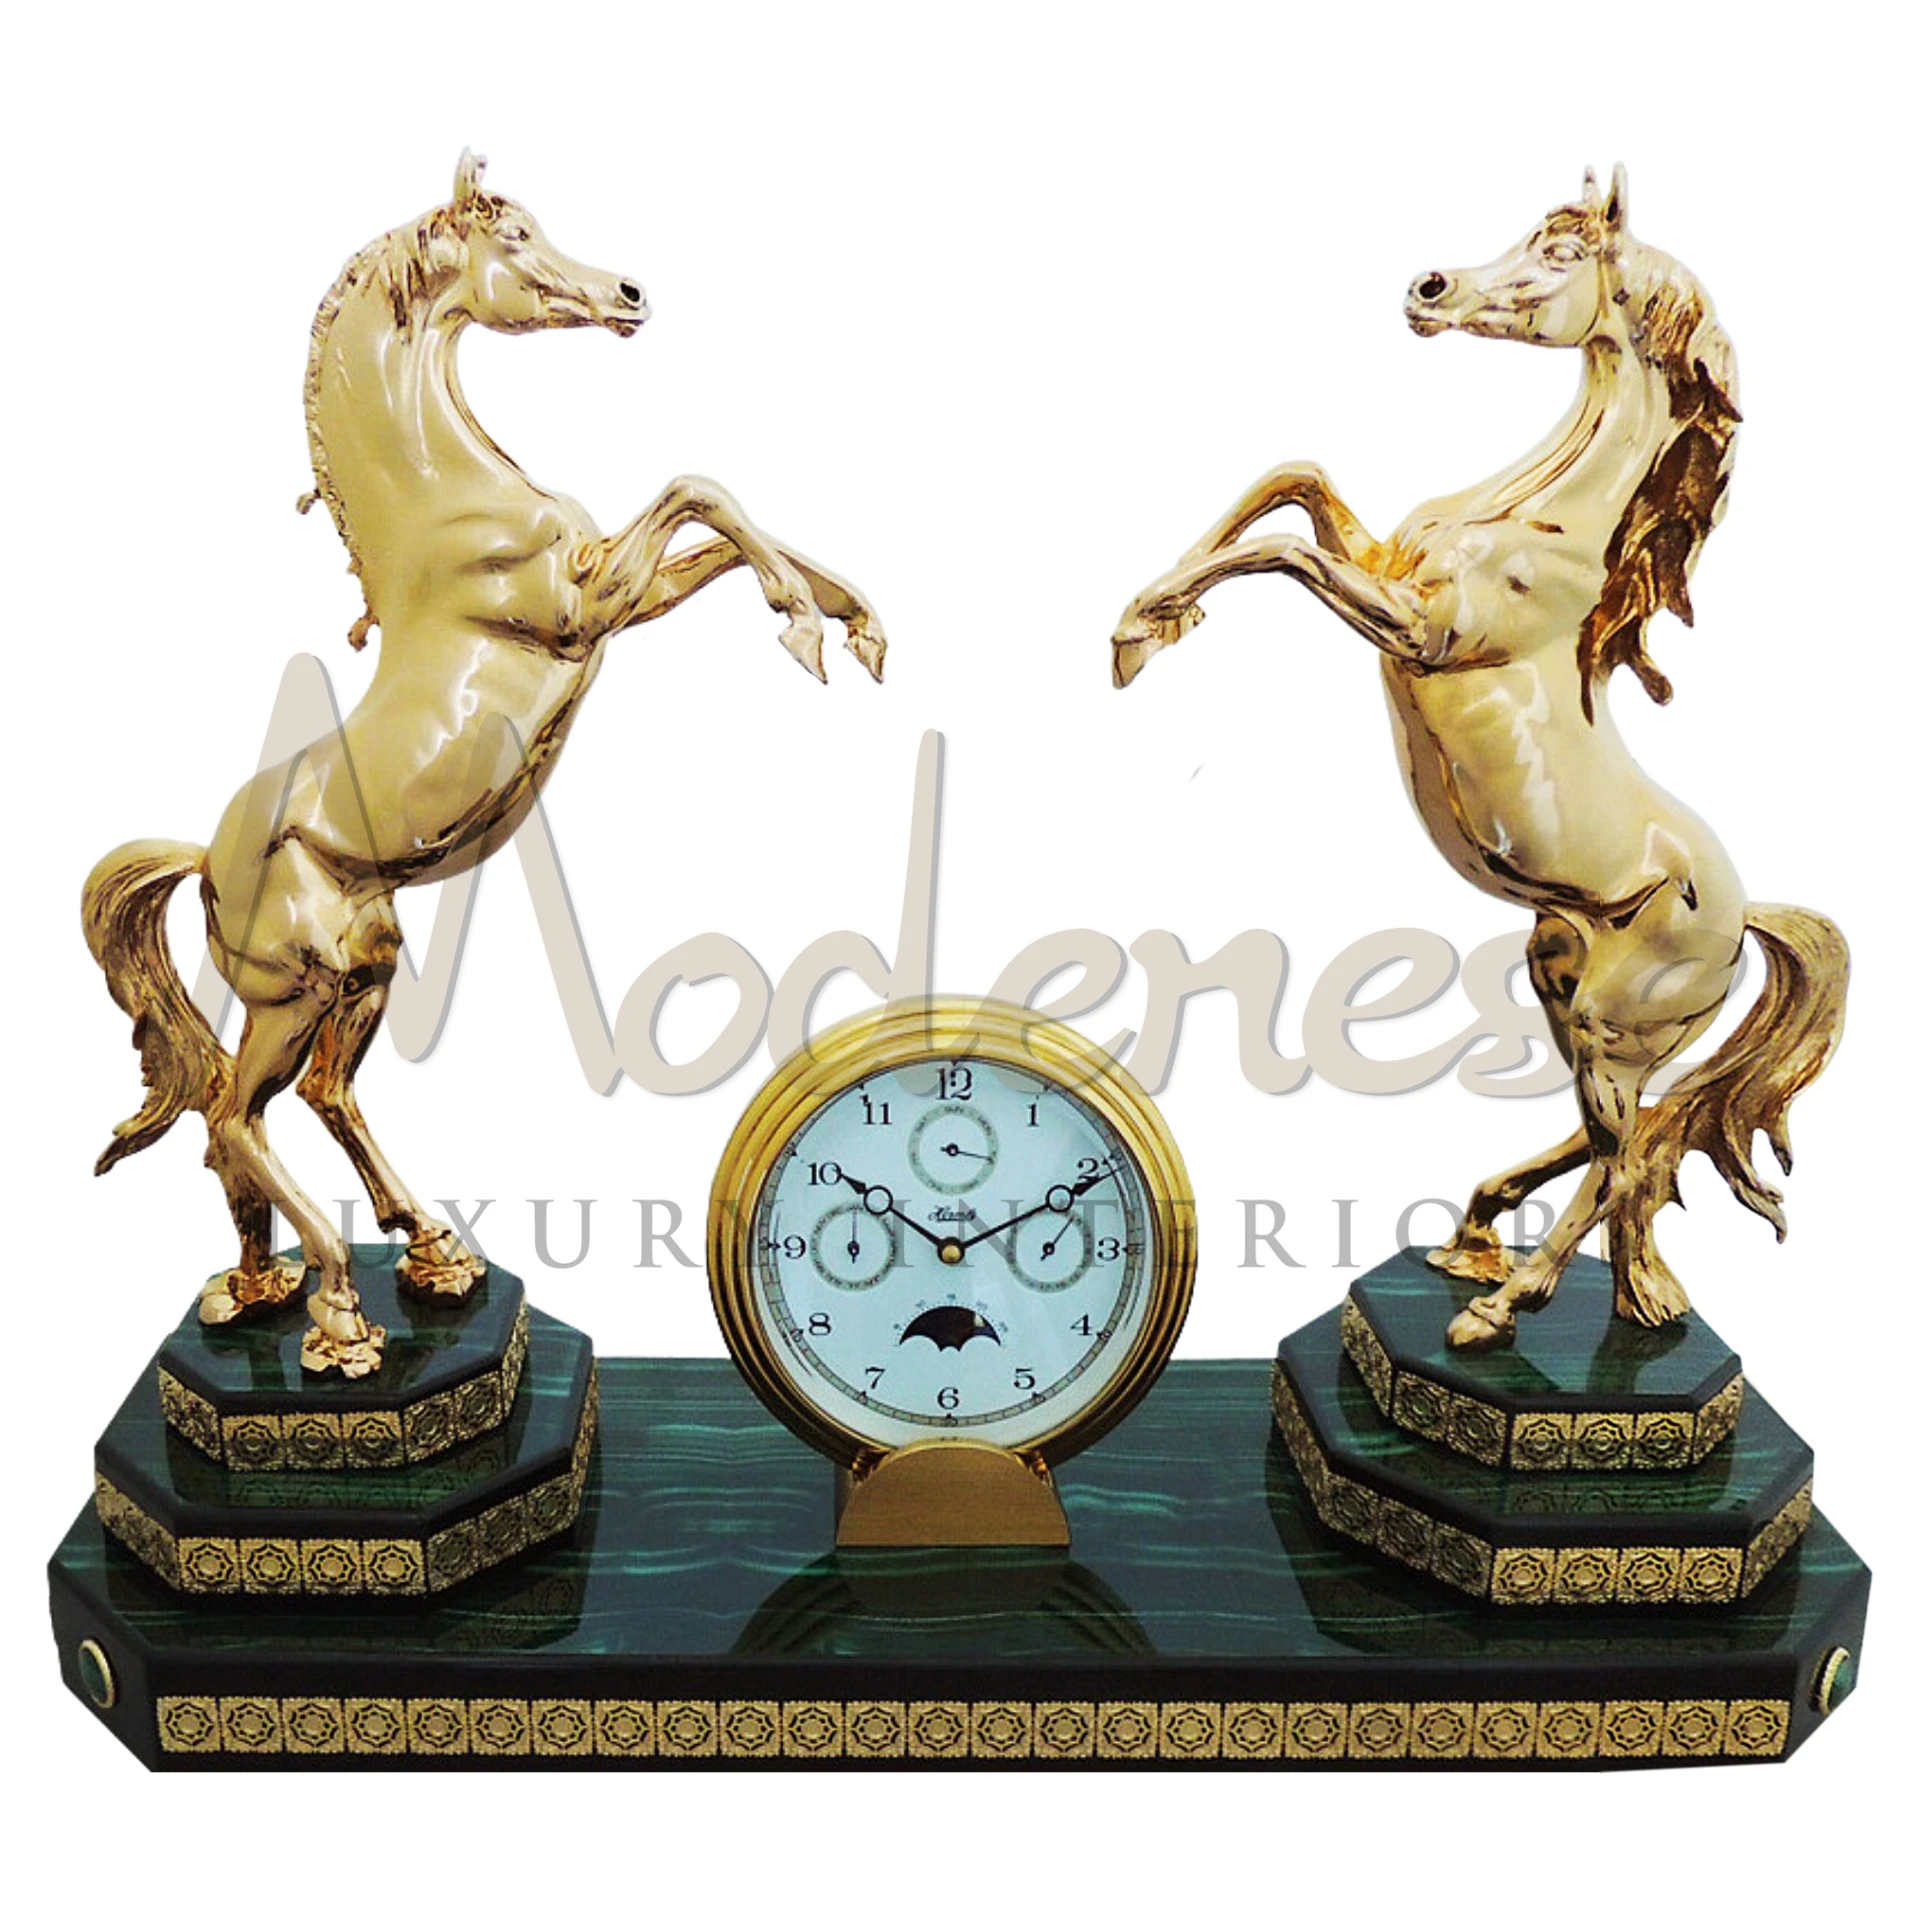 Premium Horse Table Clock in various styles, featuring quality craftsmanship and elegant designs, ideal for adding a touch of luxury to interior decor.






